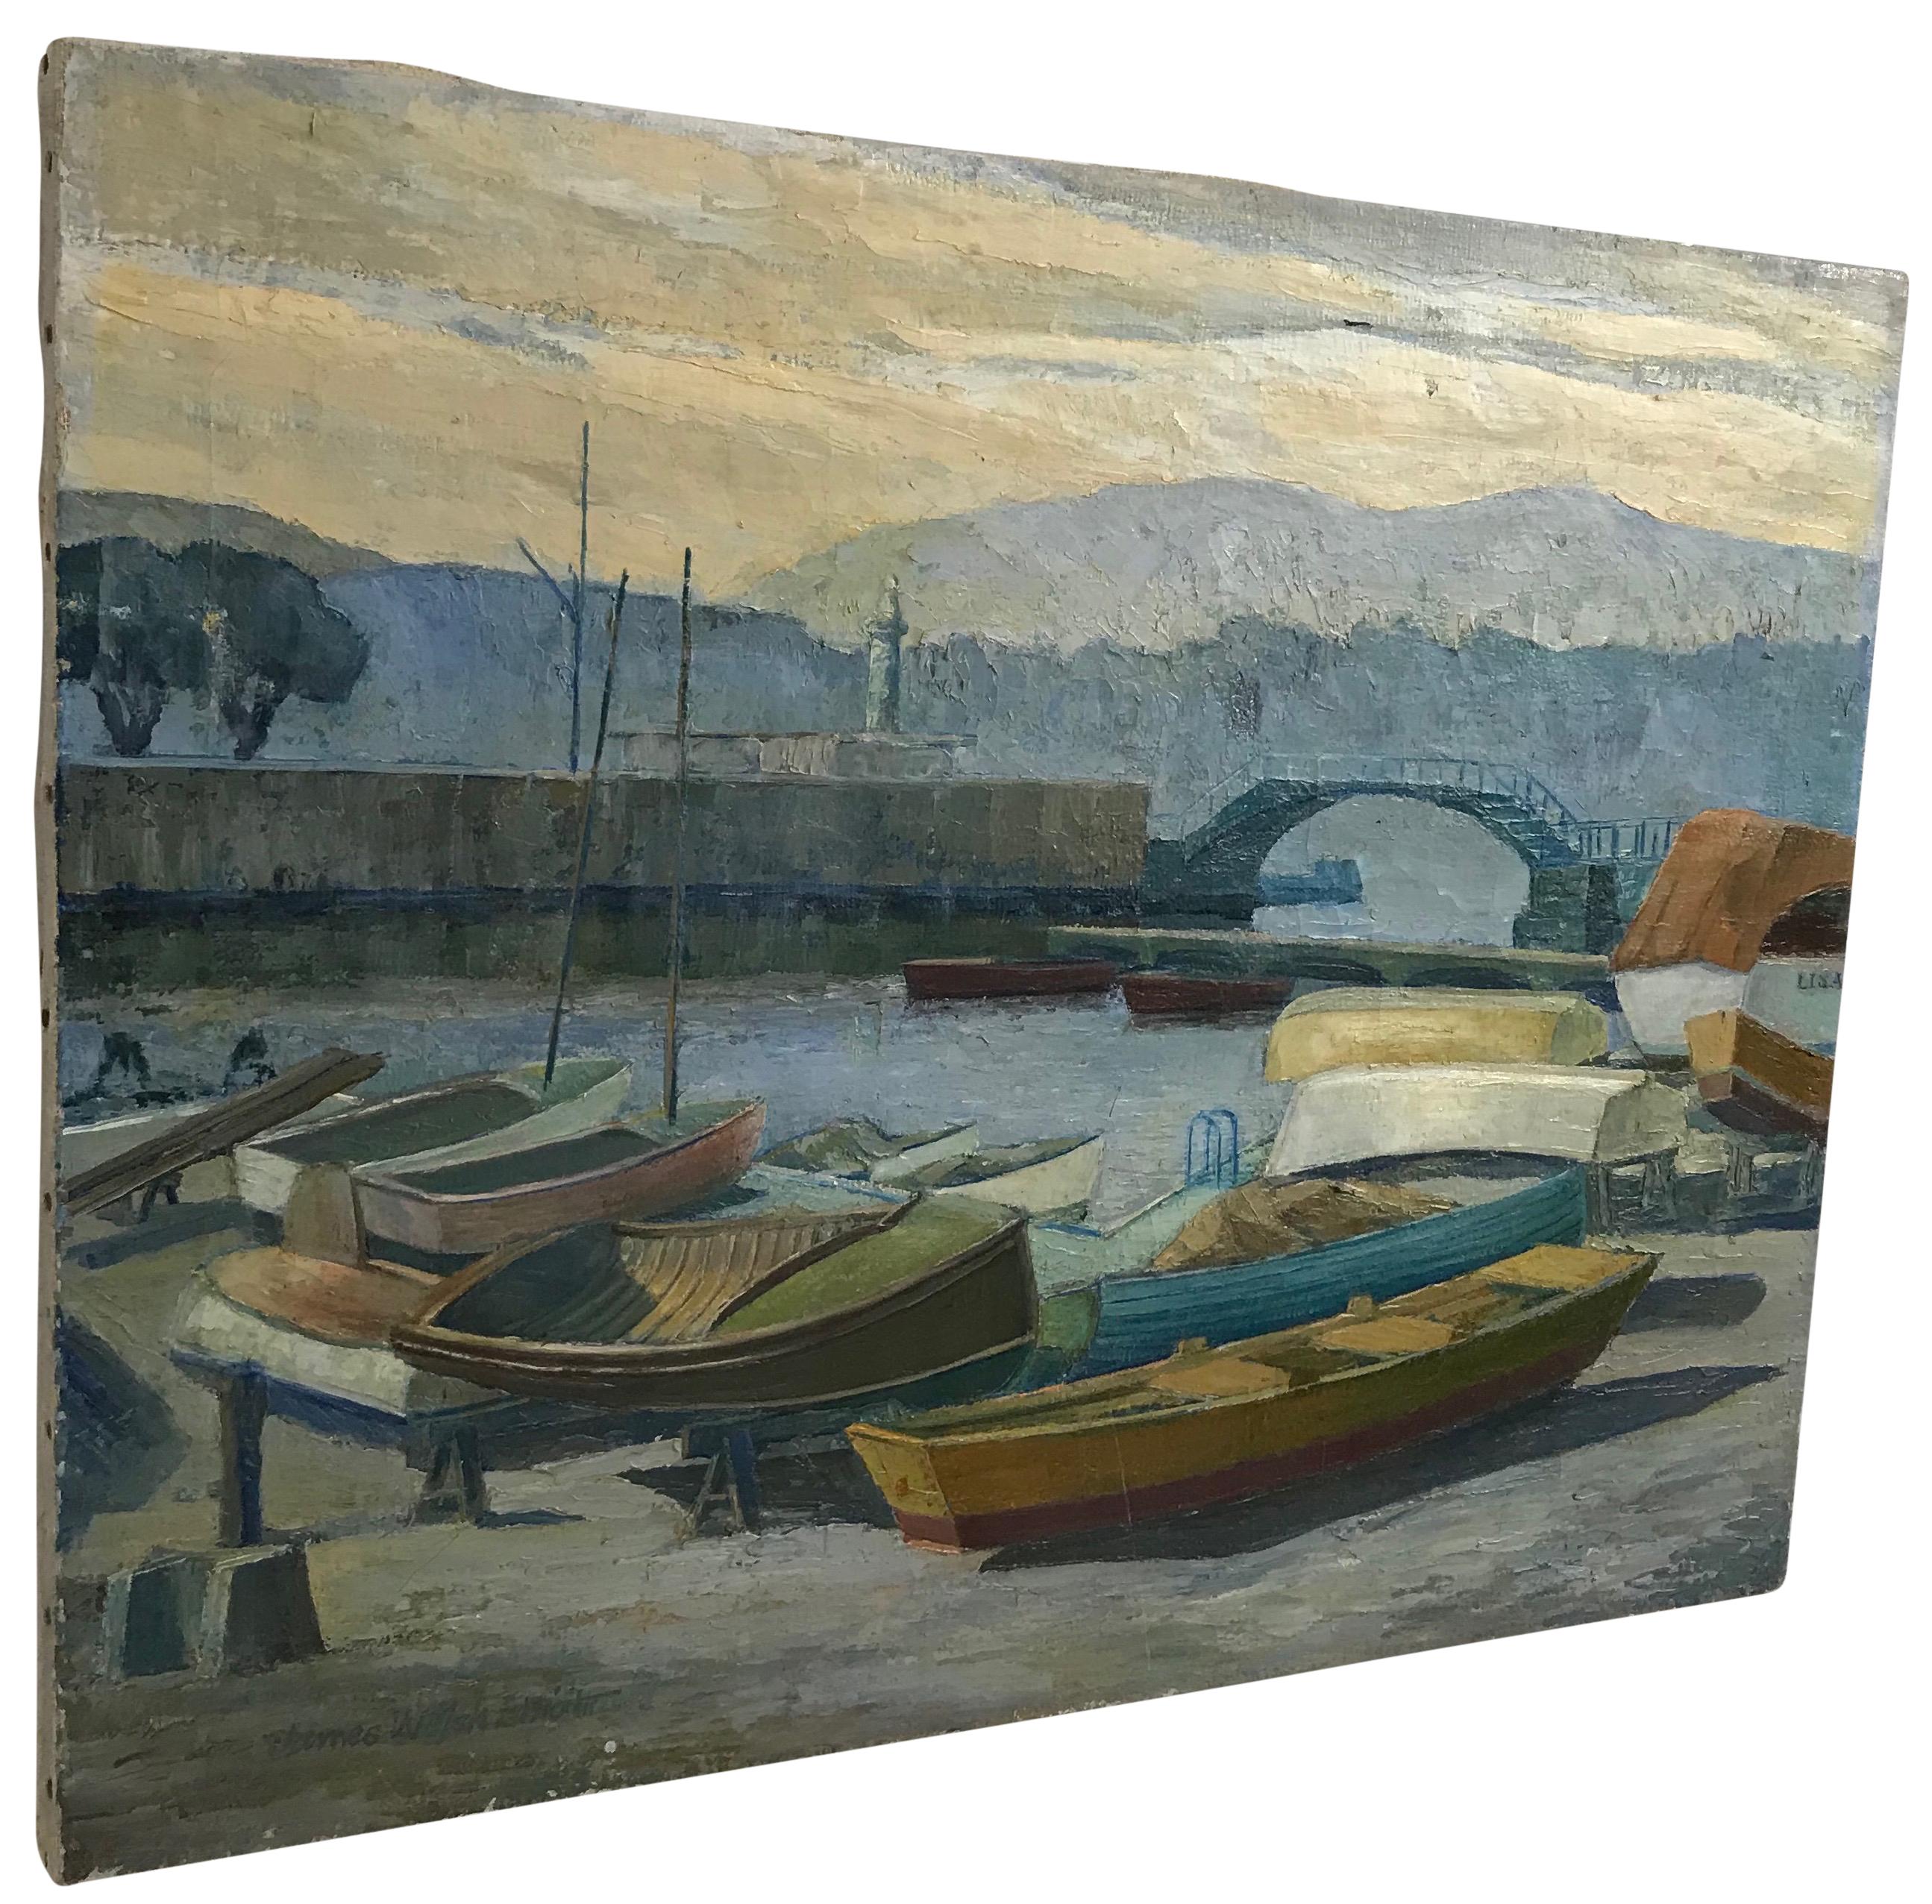 Hand-Painted California Coastal Landscape Painting of Rowboats by James Welsh Elliott